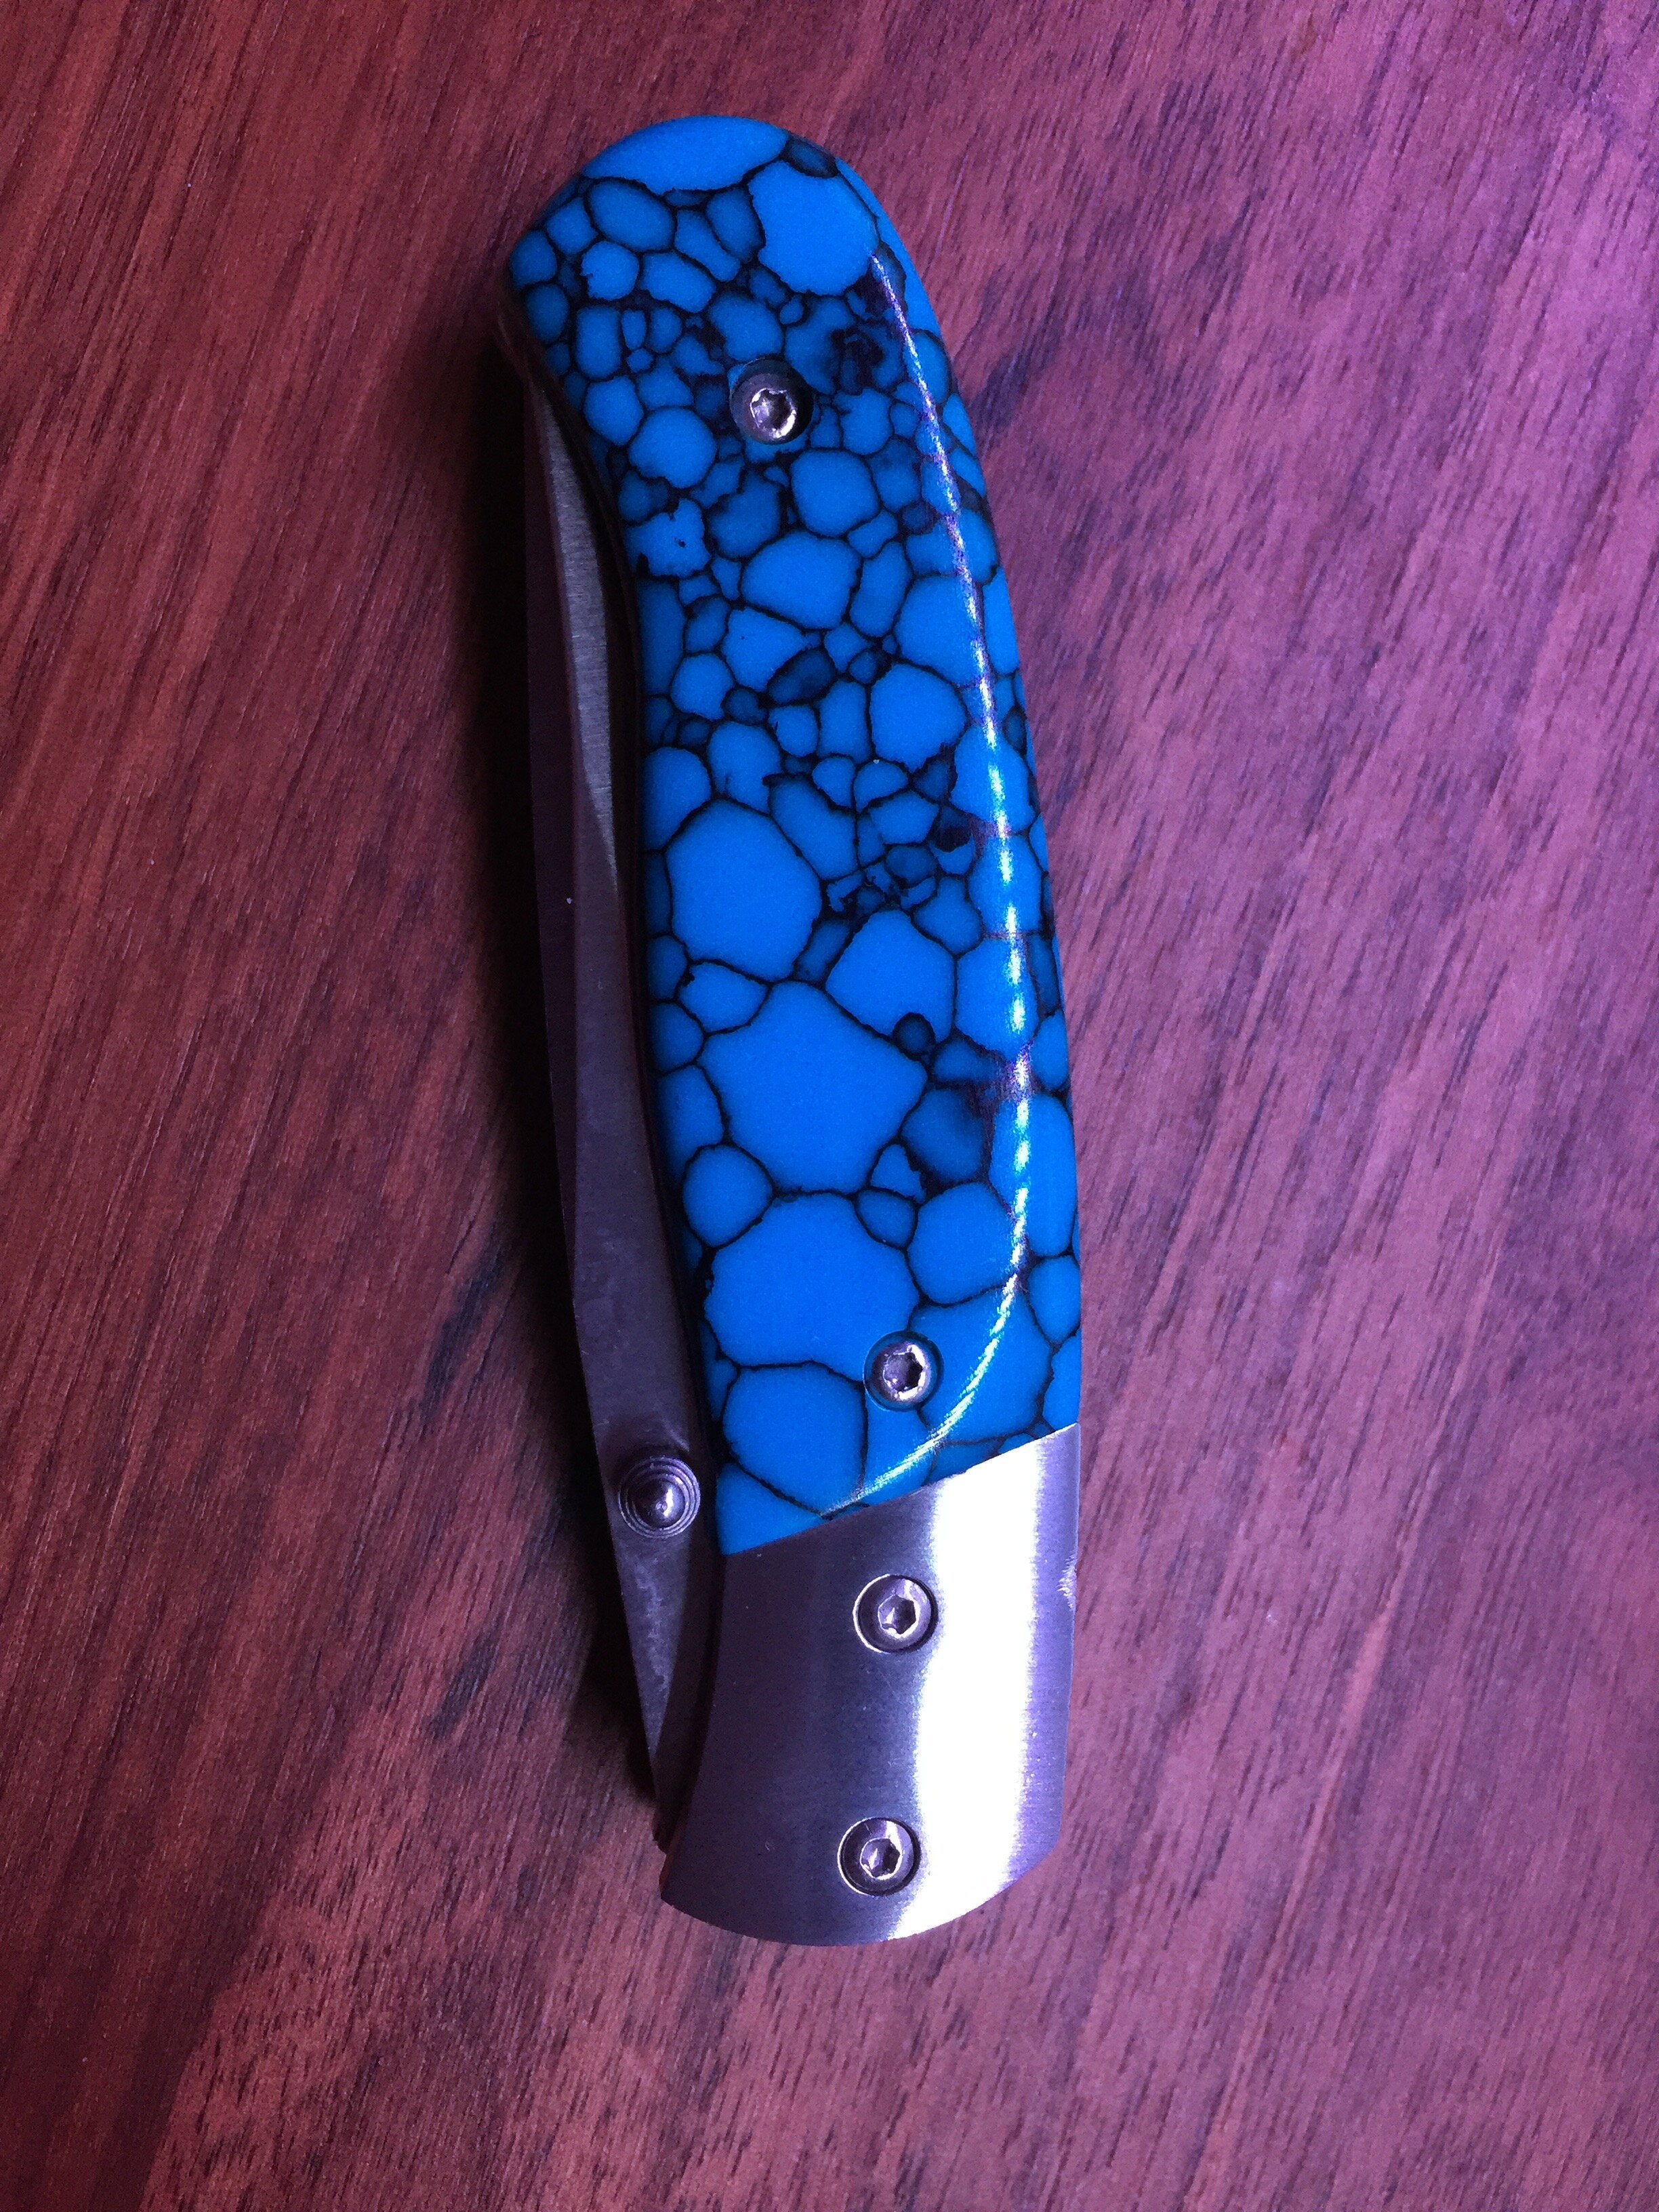 stainless and turquoise trustone linerlock.